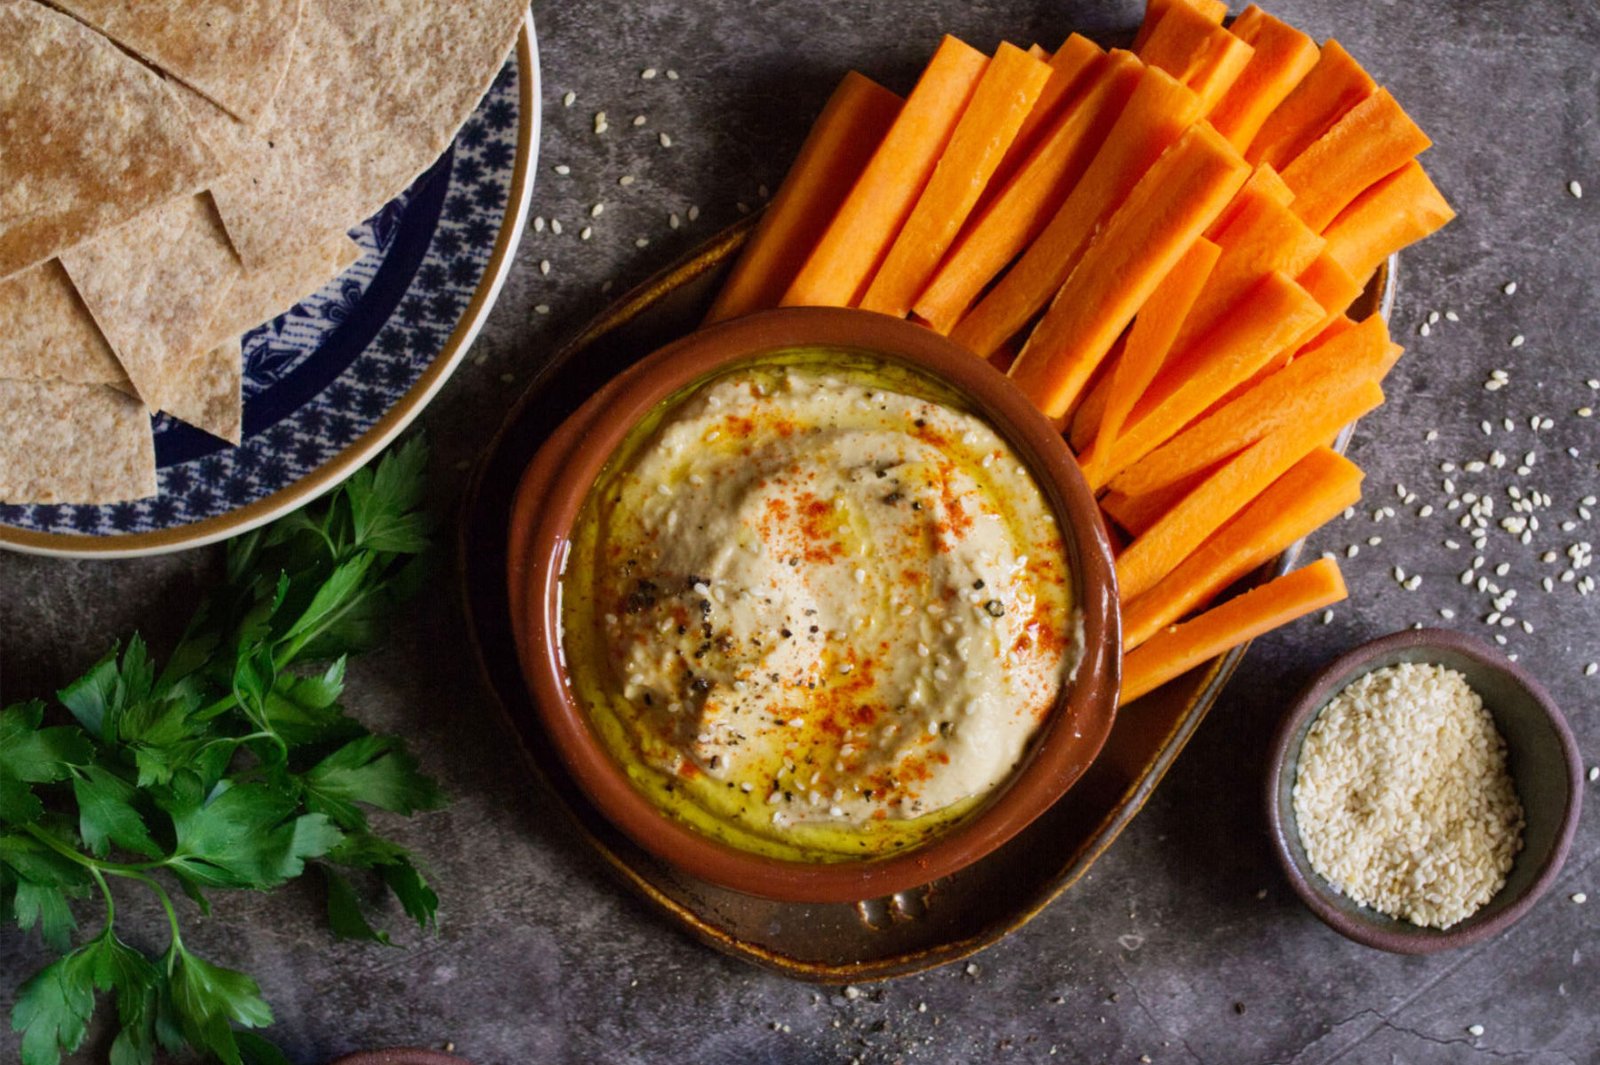 A small bowl of Mediterranean hummus beside some bread and carrot sticks.